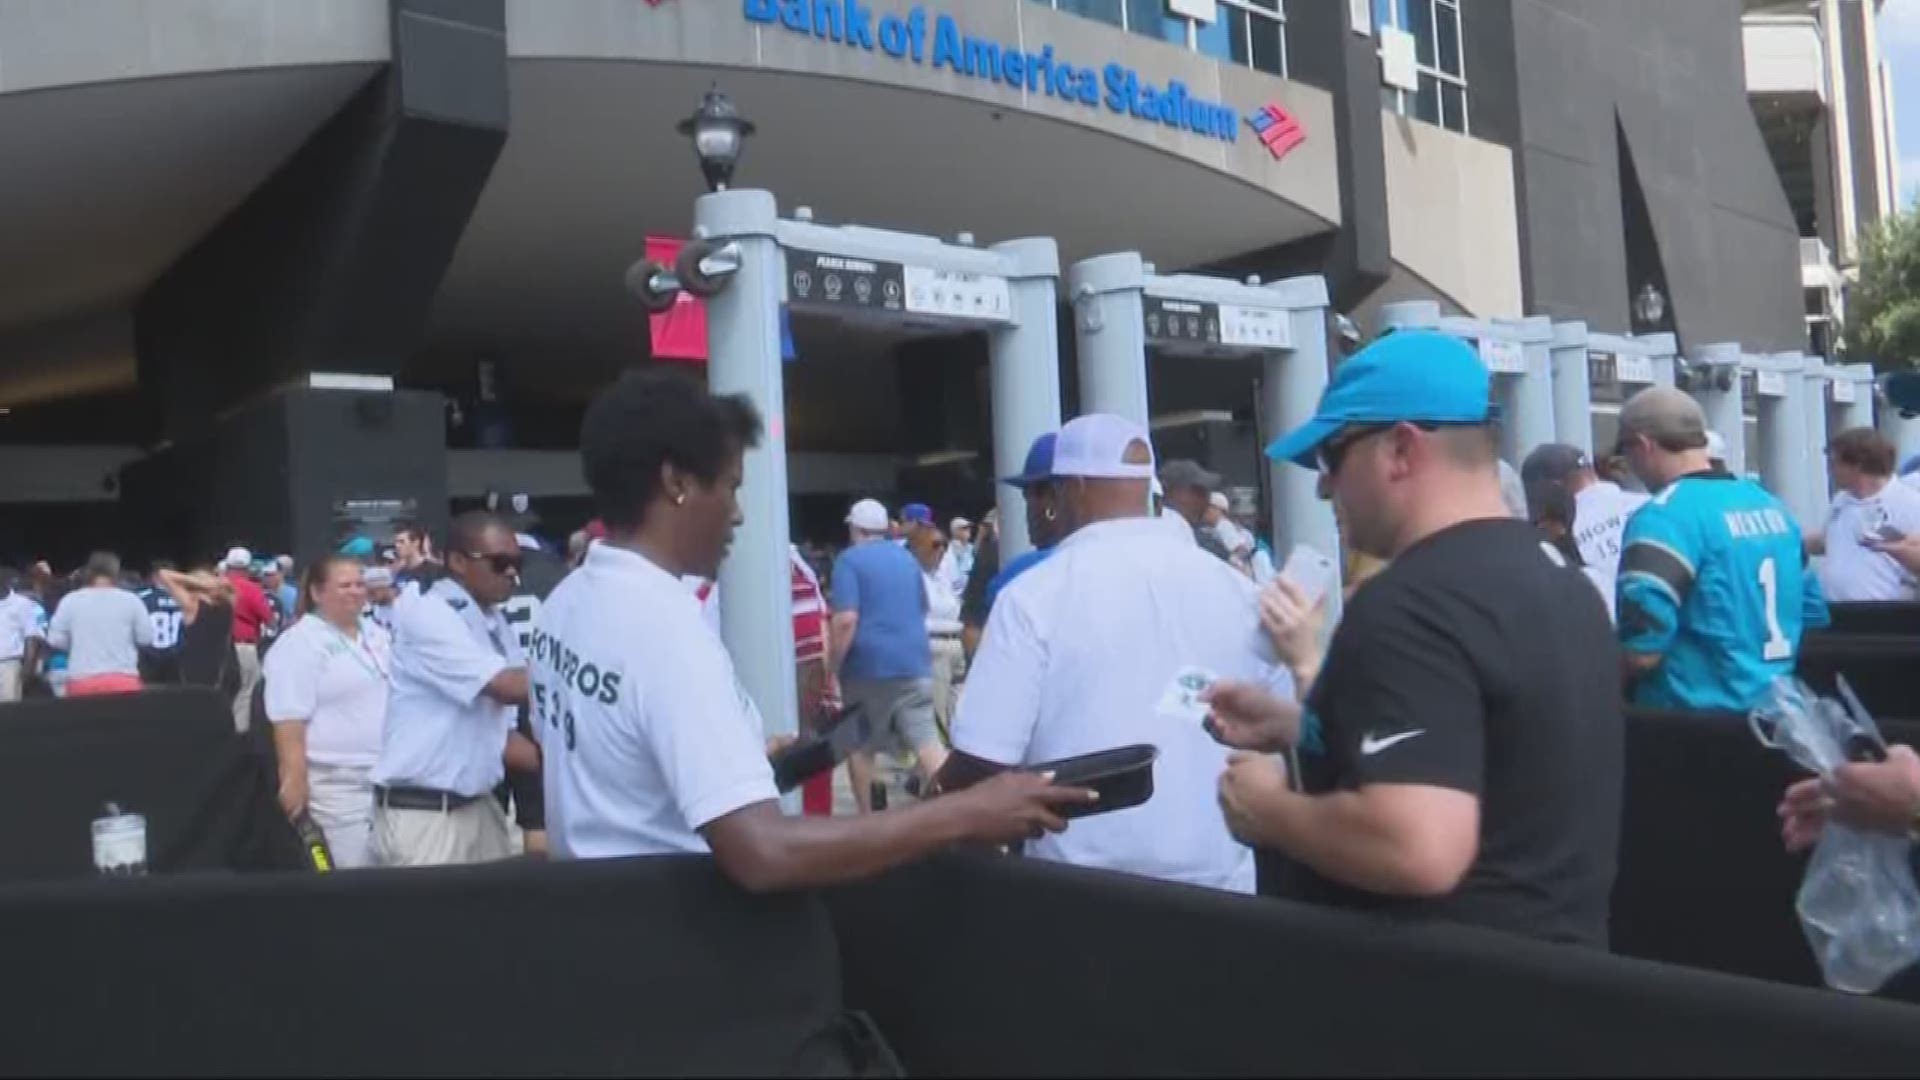 As thousands gathered for the Panthers first season home opener, some security changes came into play.